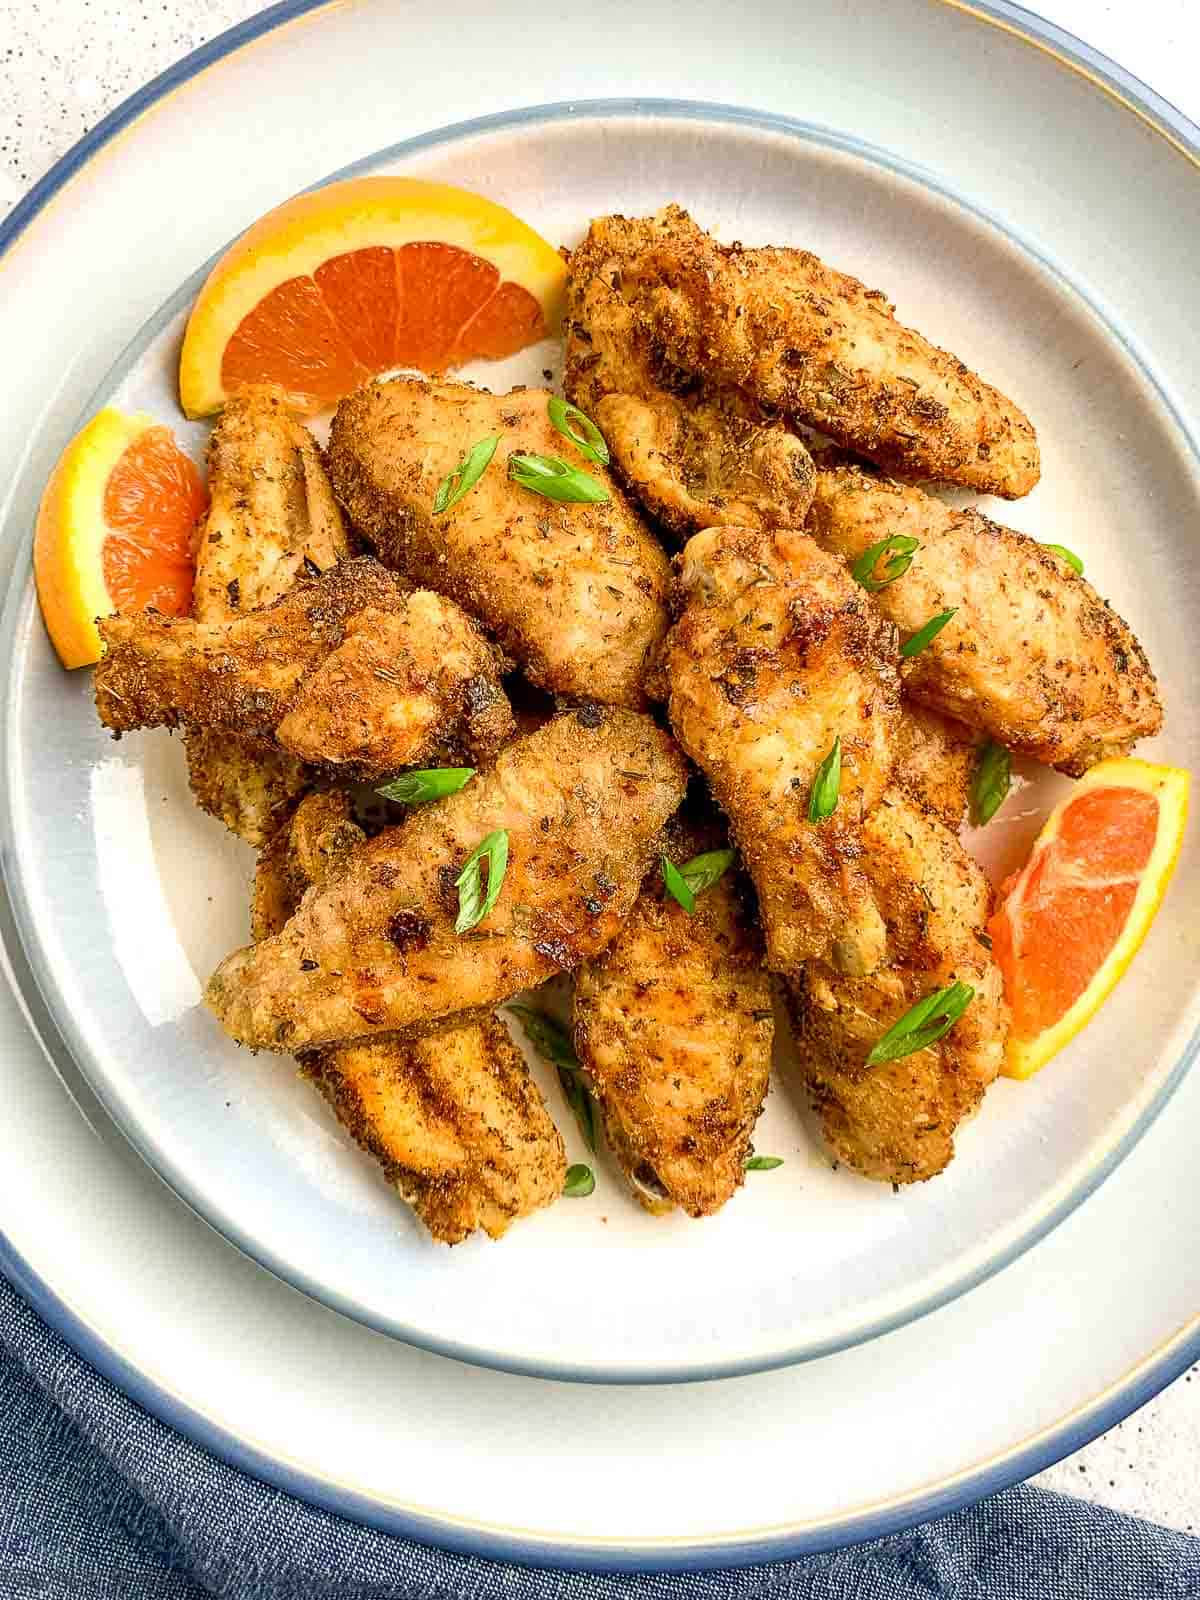 An overhead view of Cajun chicken wings on a plate with orange slices.